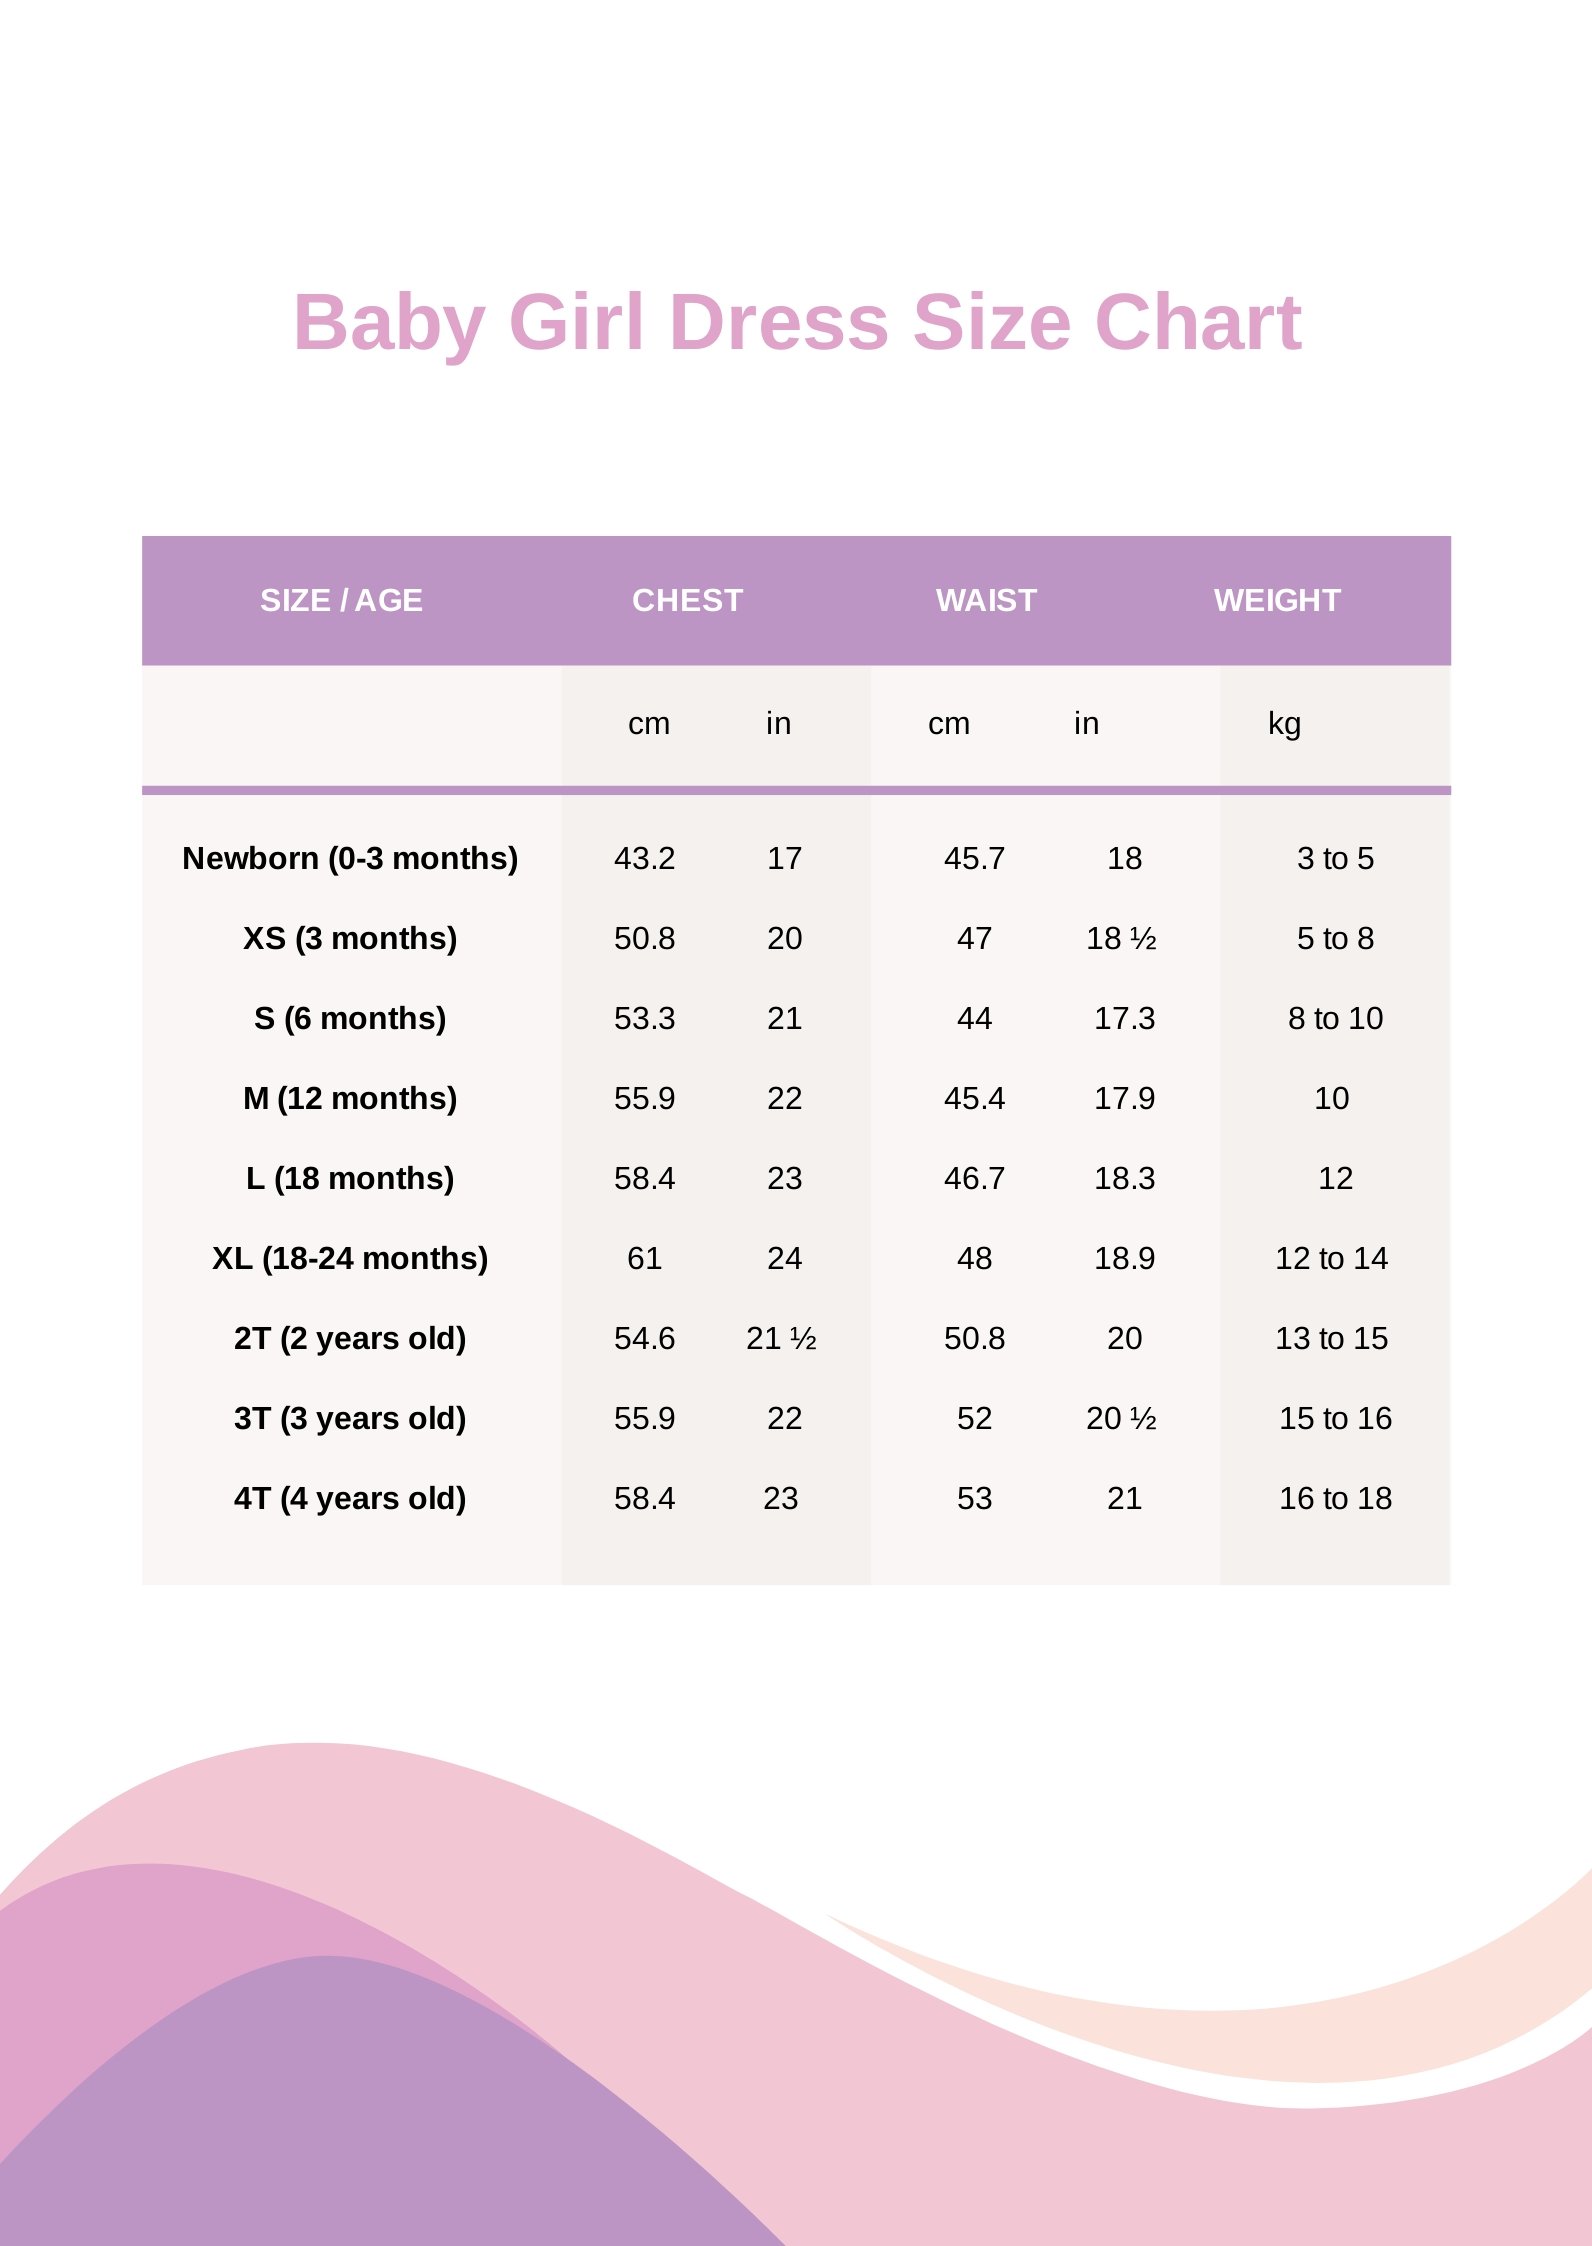 Baby Girl Dress Size Chart in PDF - Download